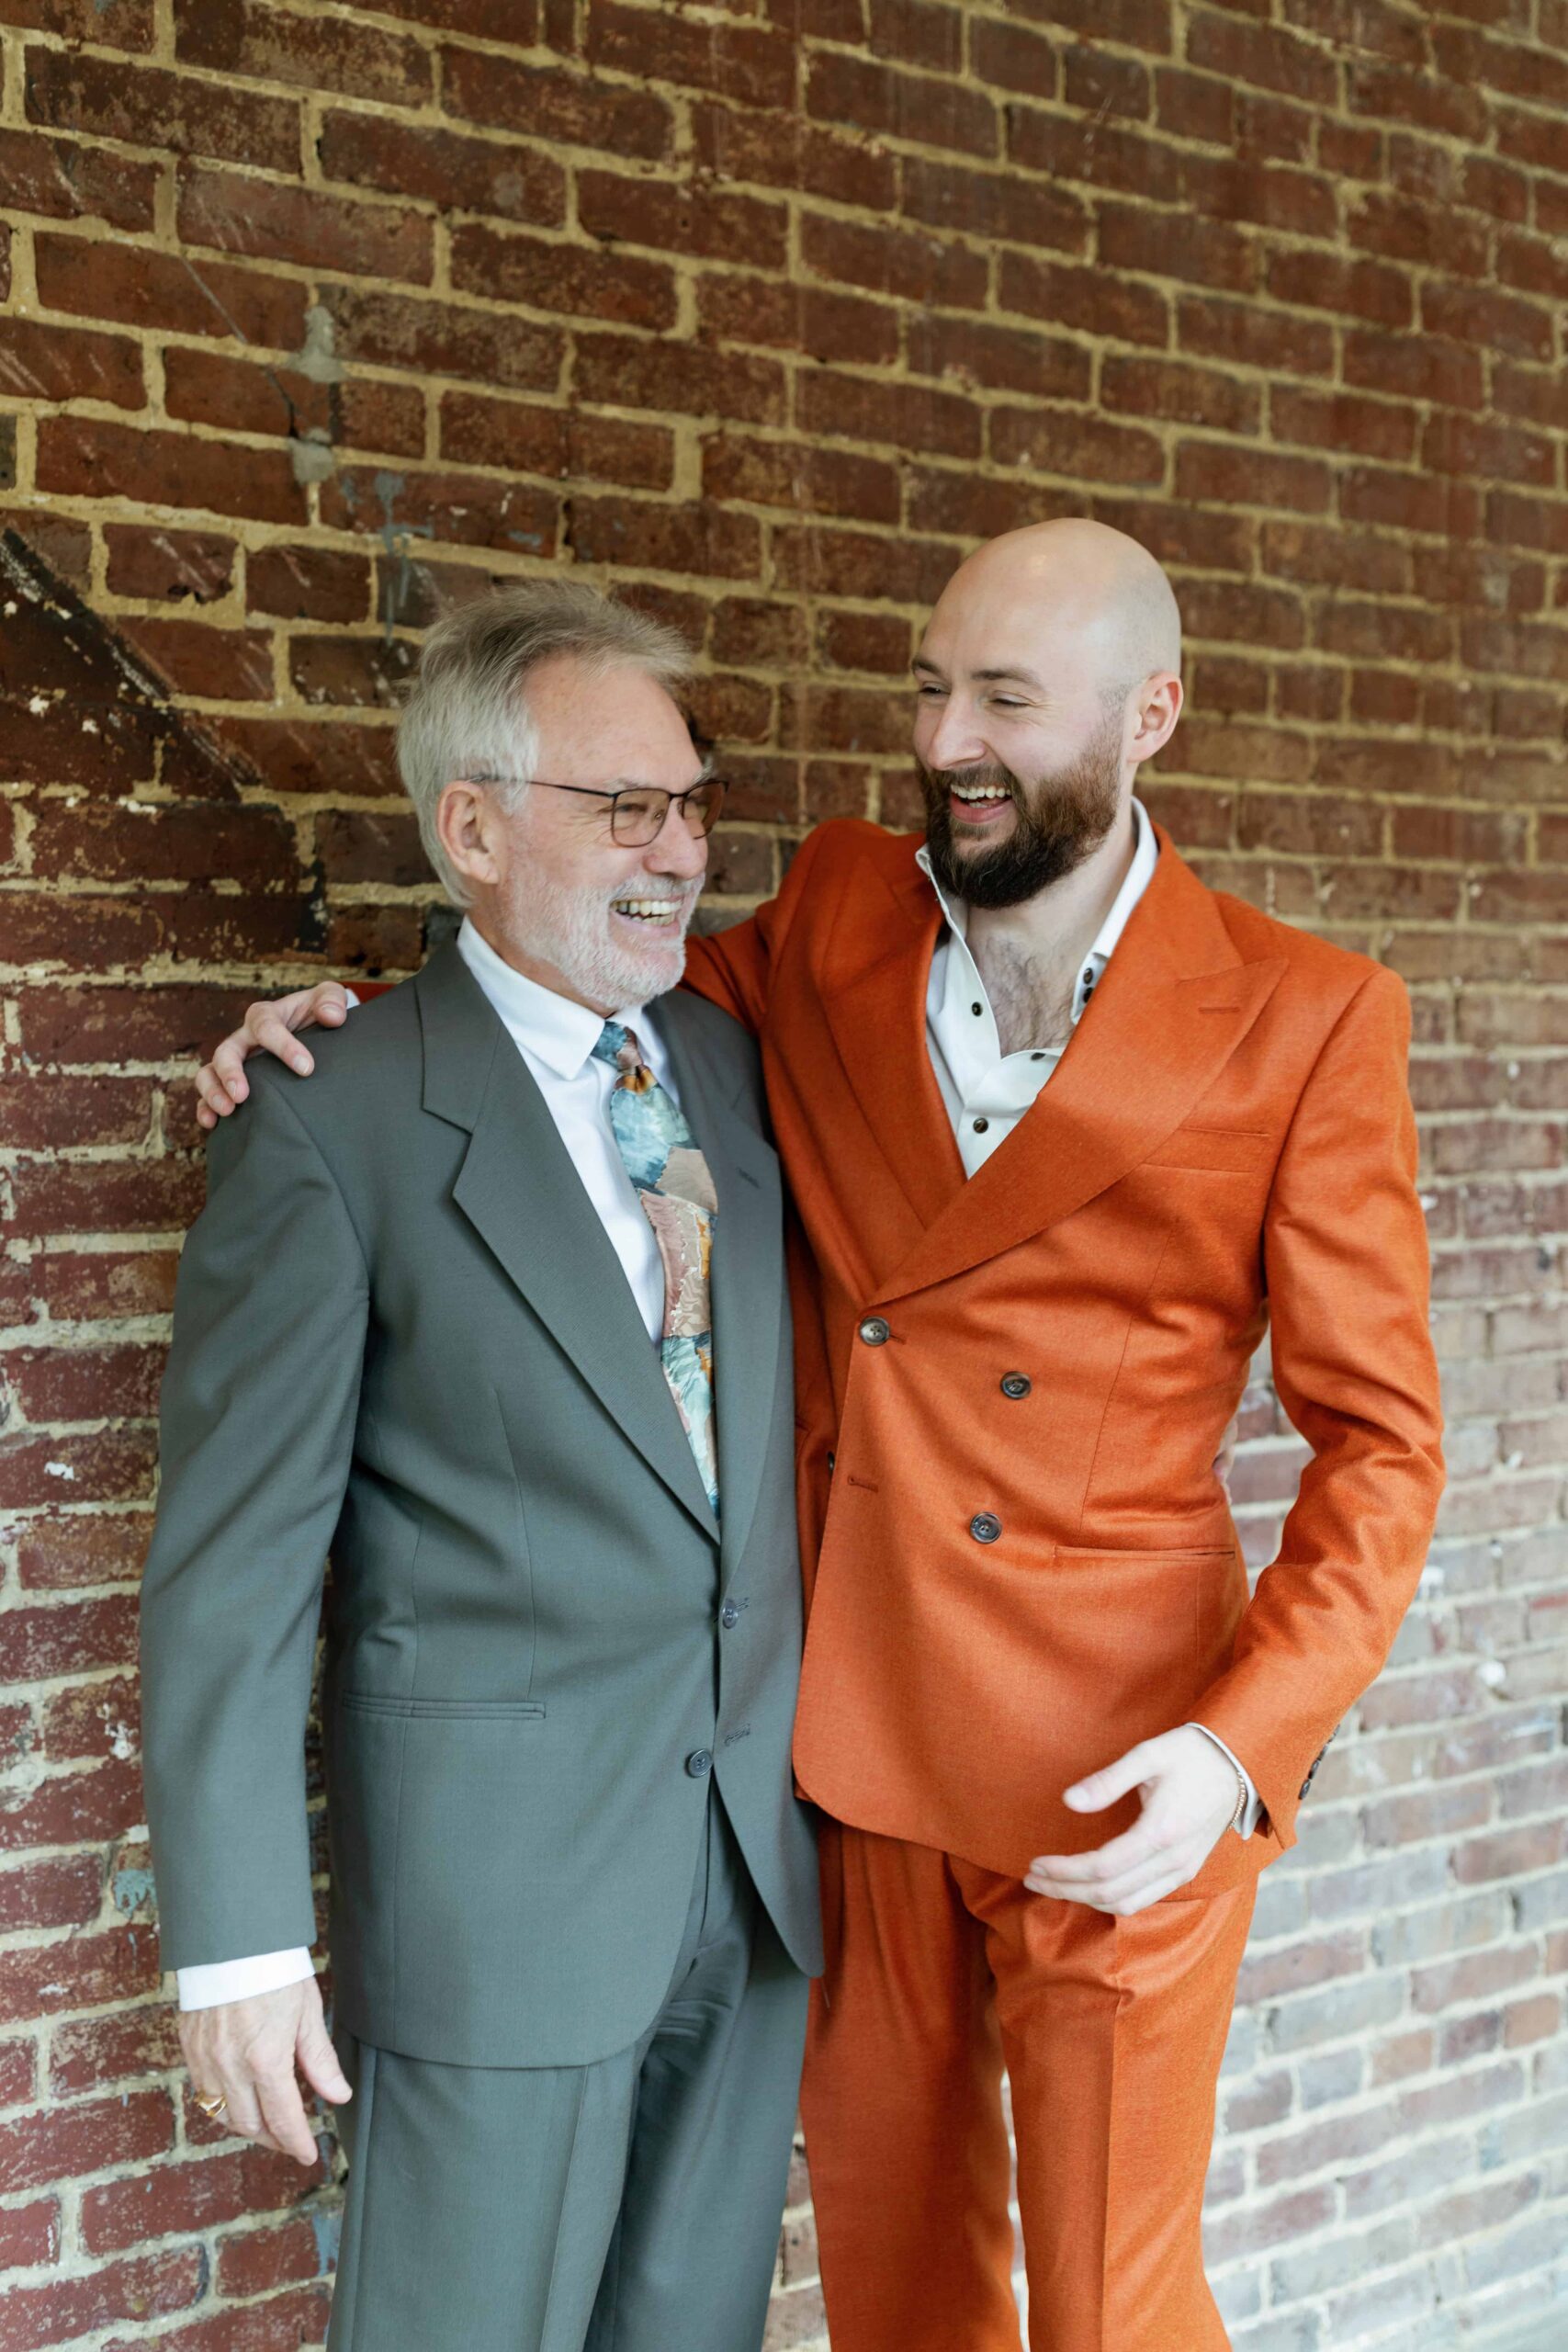 The groom laughing with his dad.